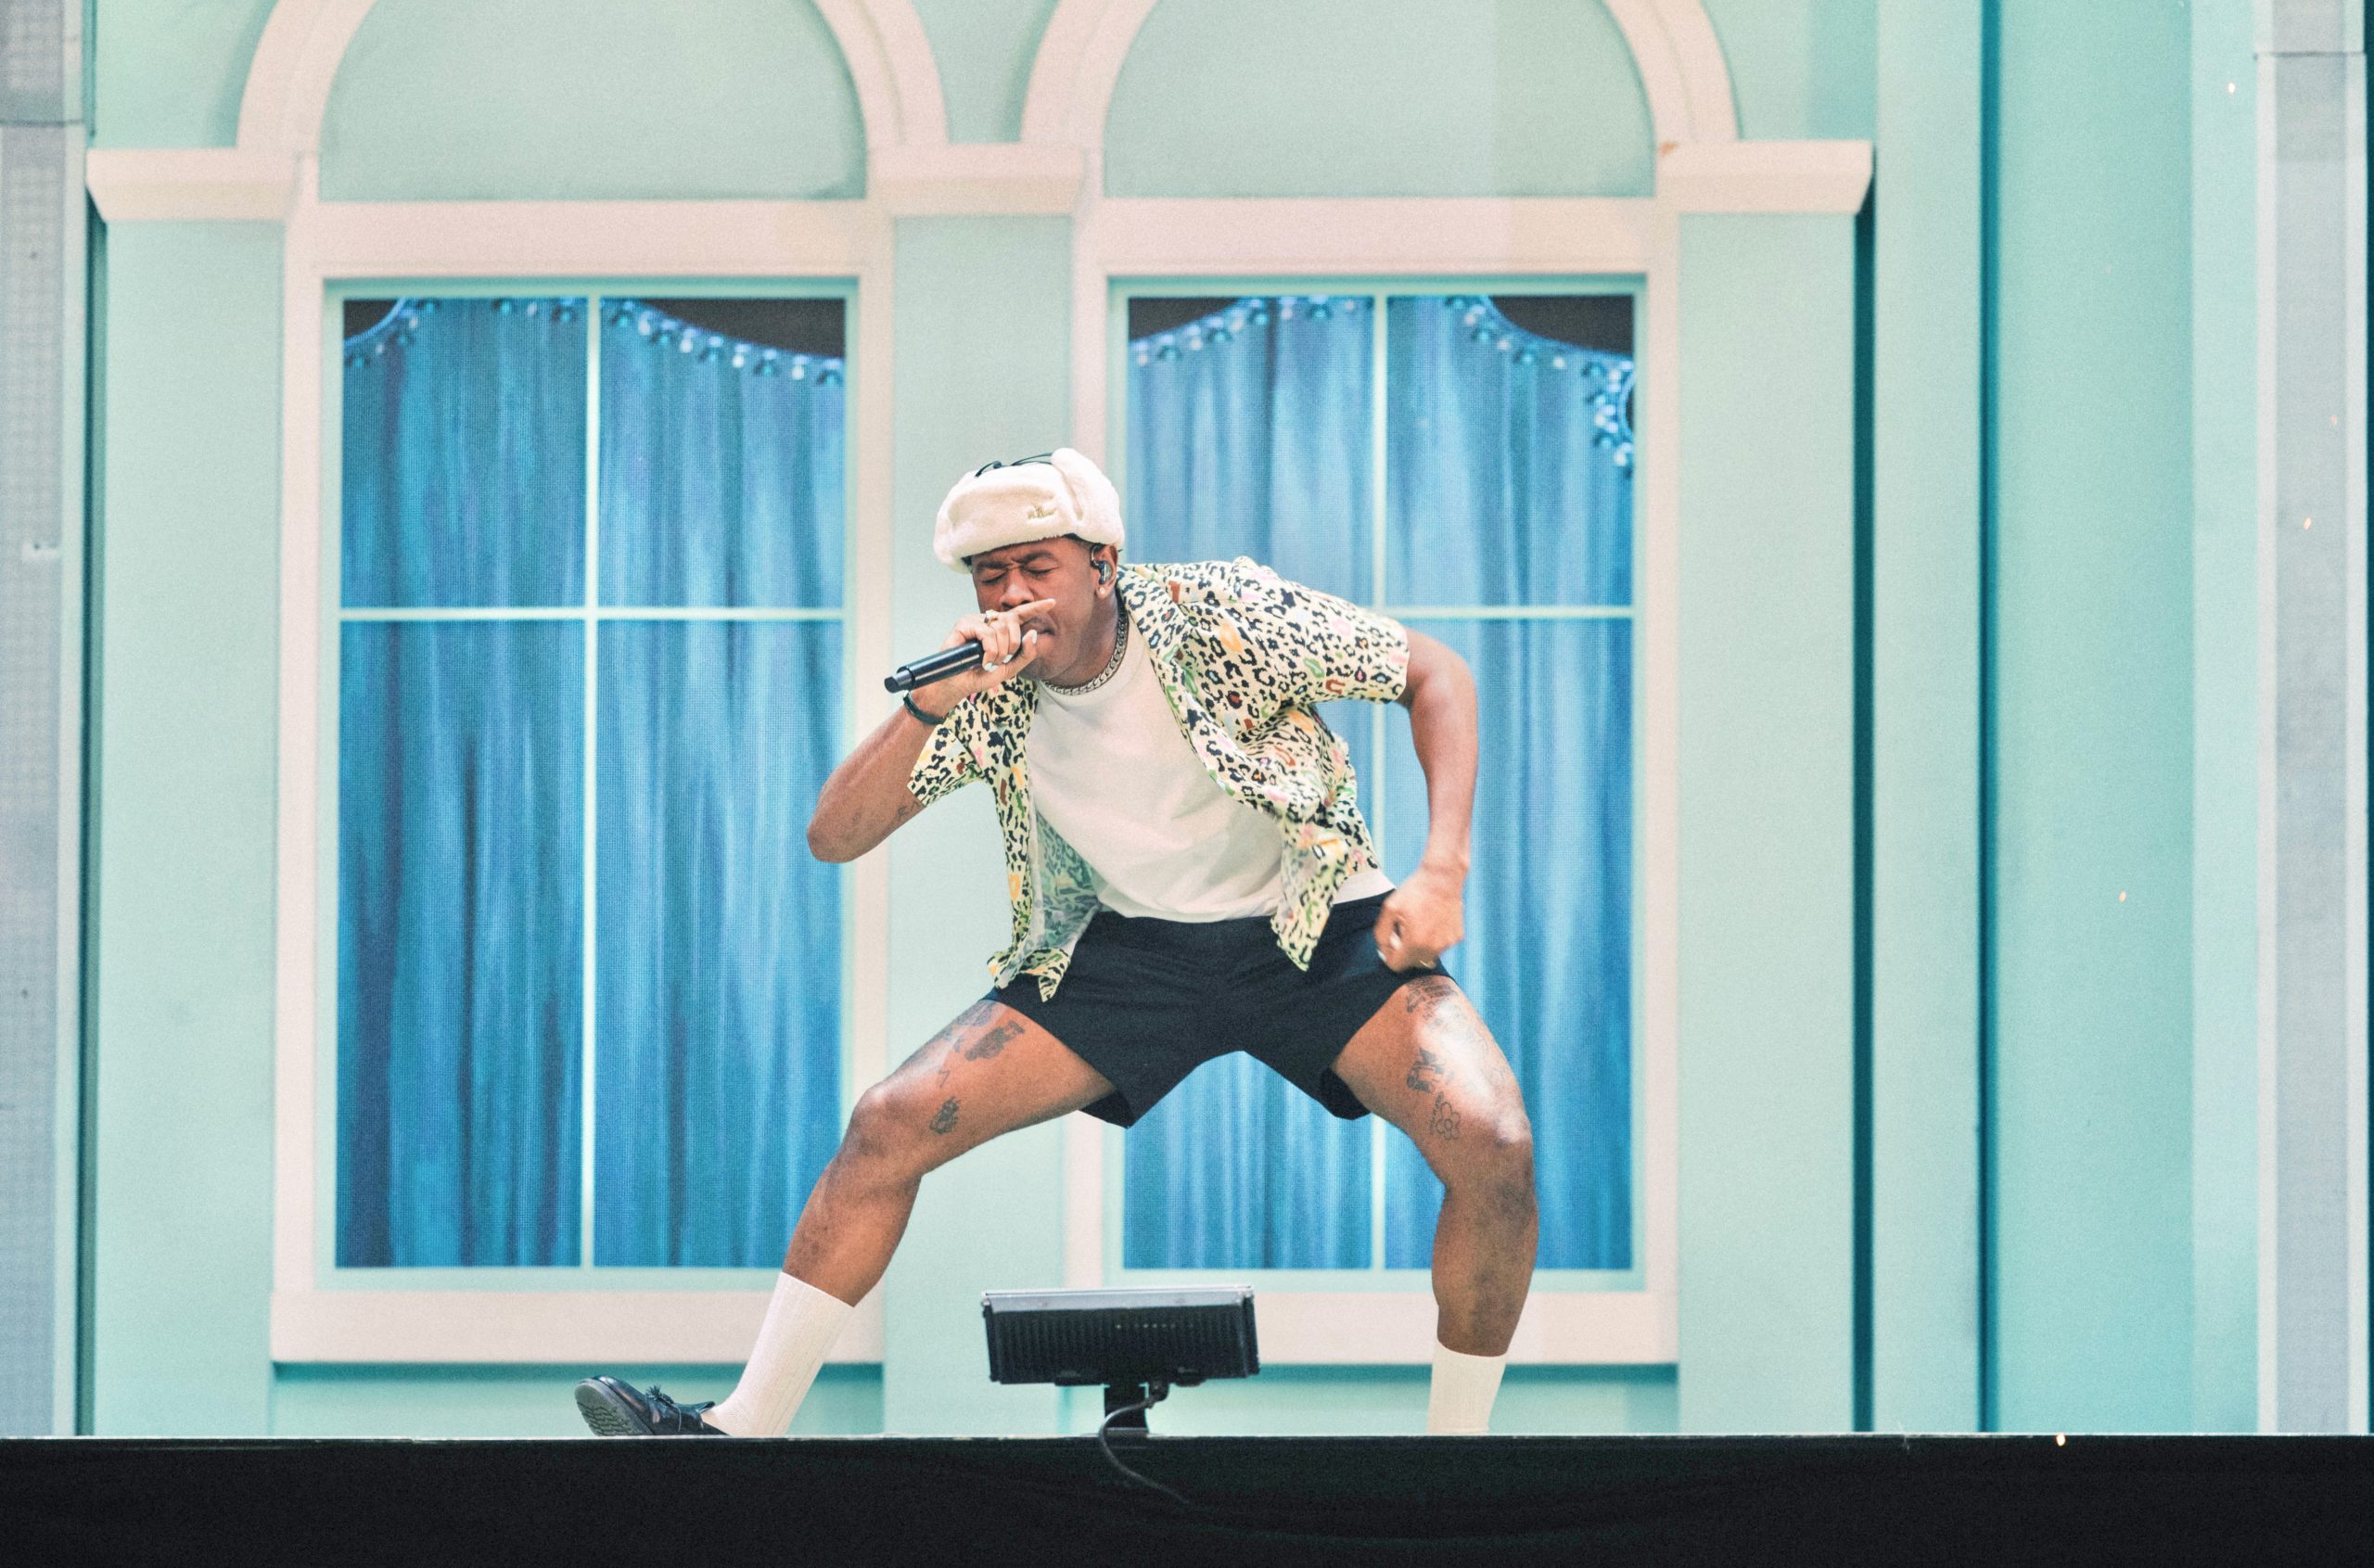 Photos: Tyler, the Creator brings 'Call Me If You Get Lost' tour to  Portland